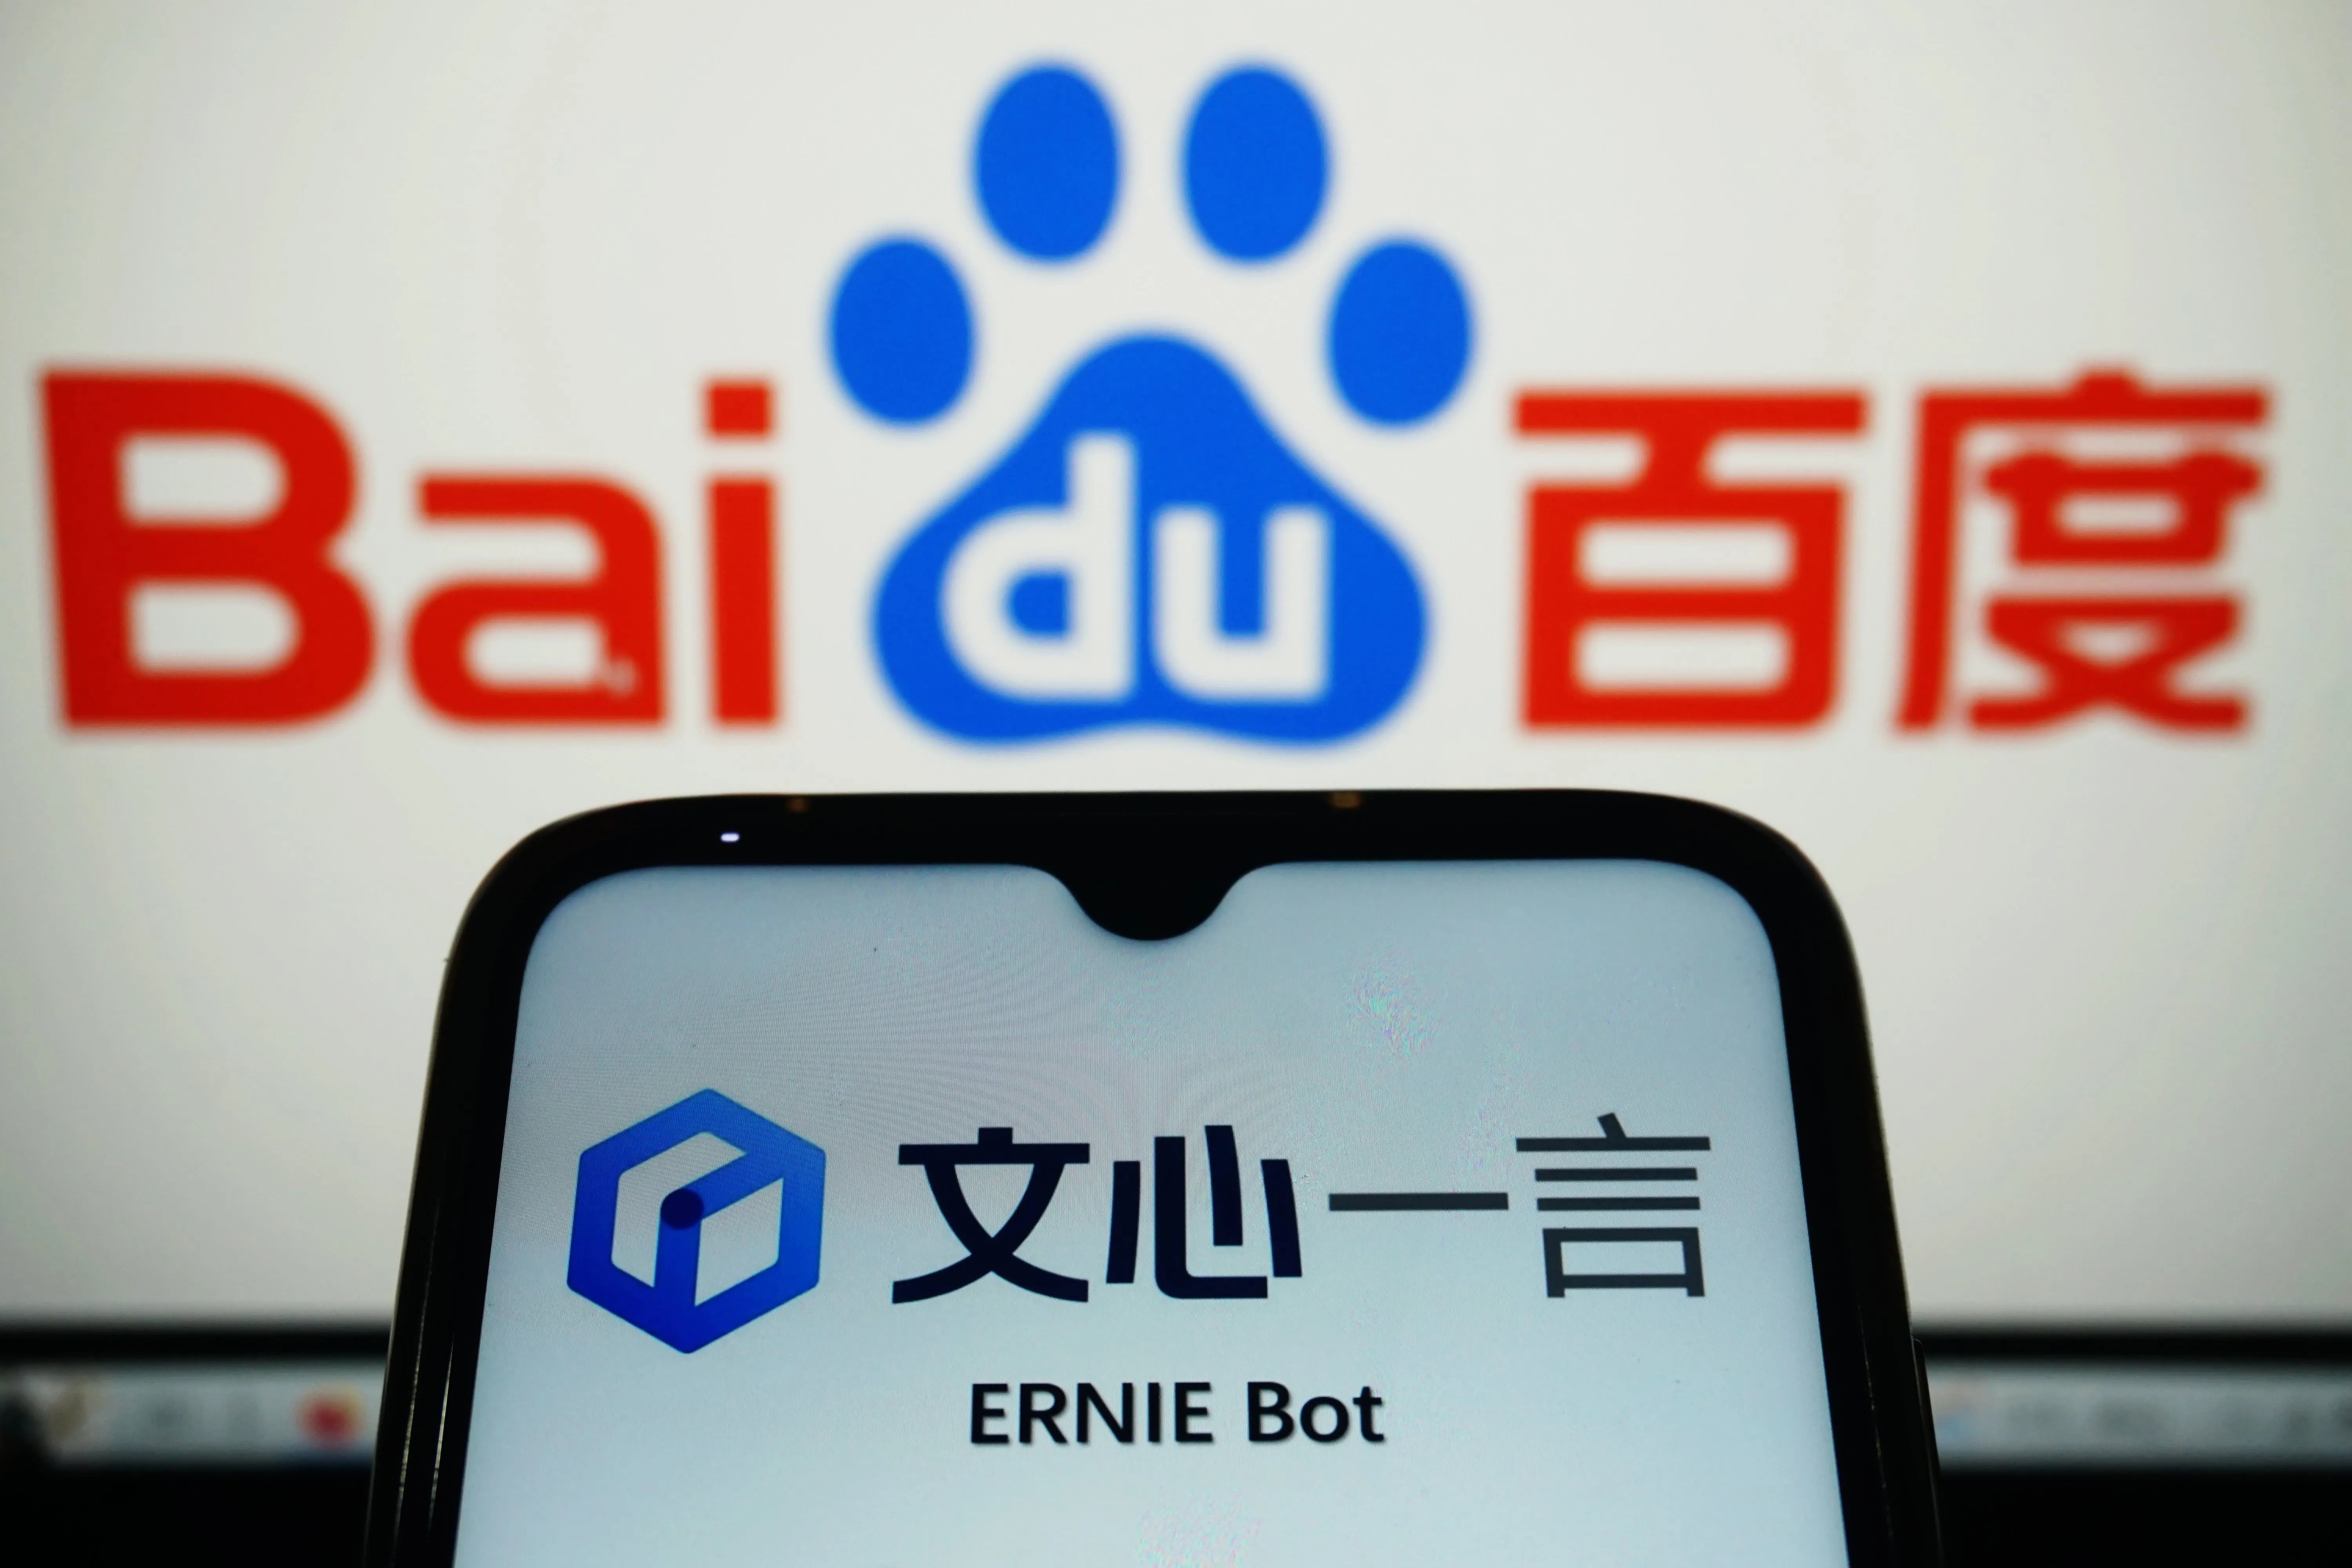 Baidu's Ernie Bot chatbot has attracted 200 million users